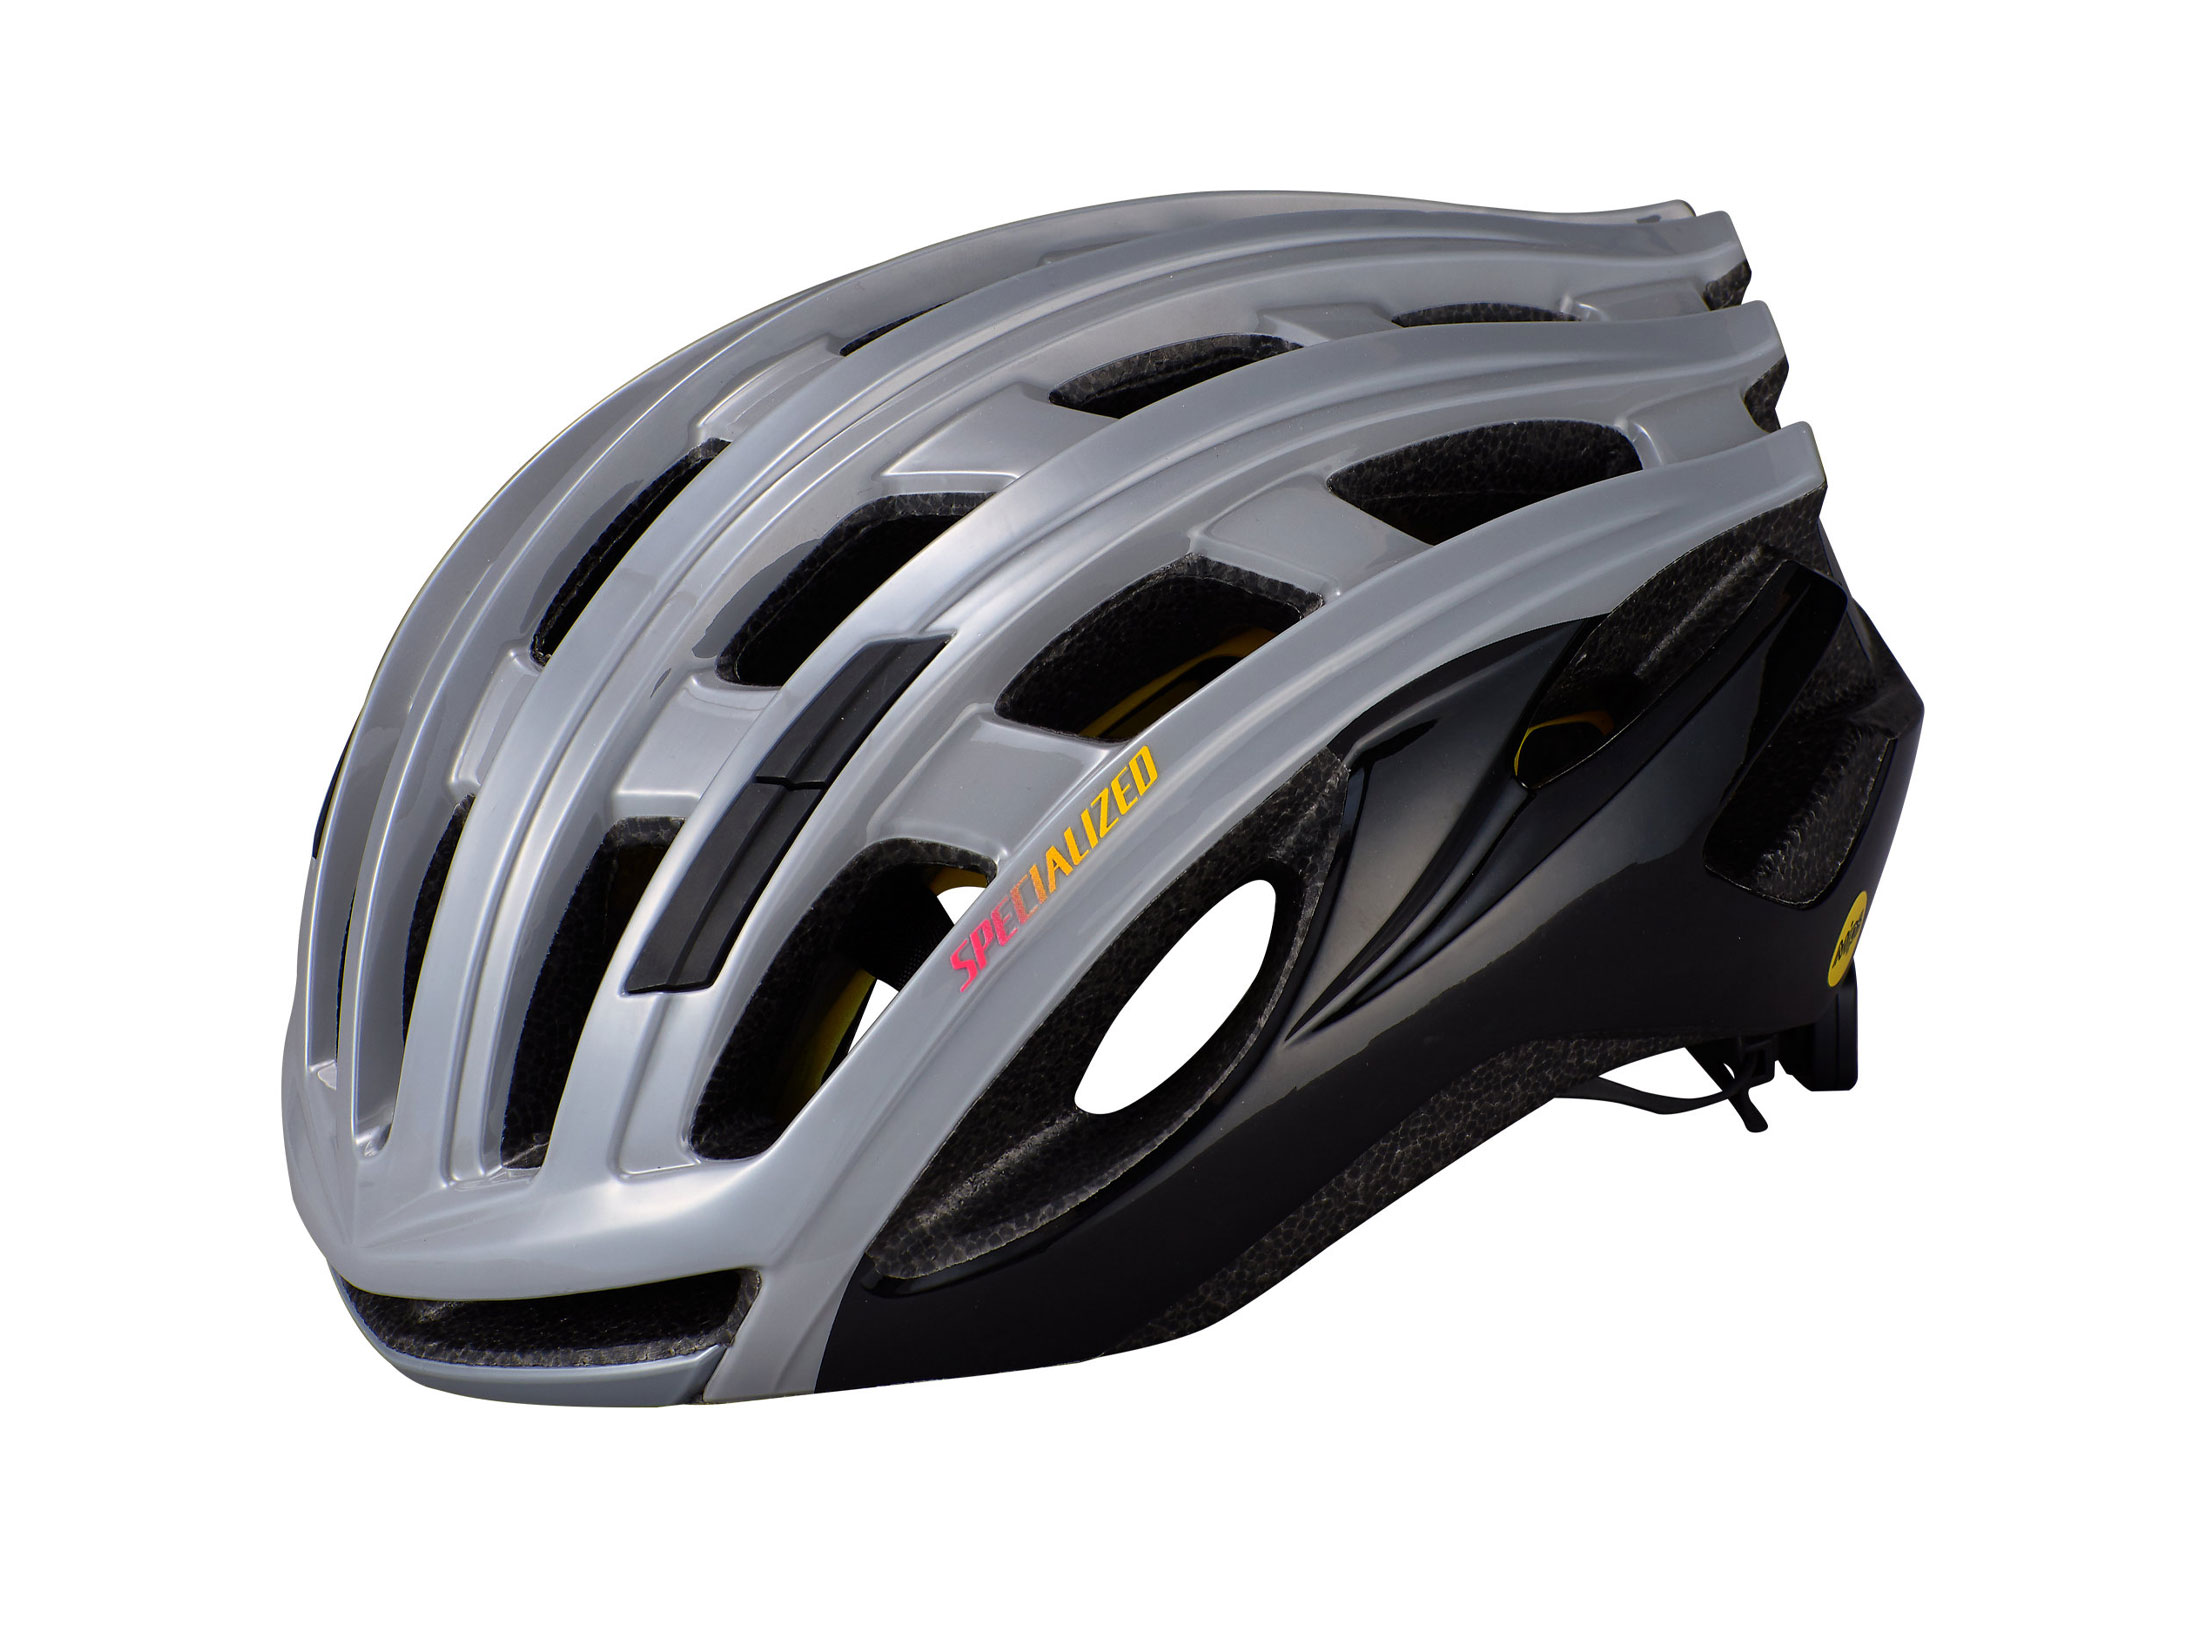 Specialized Propero III Helmet With ANGi - Cool Grey / Acid Pink / Golden Yellow